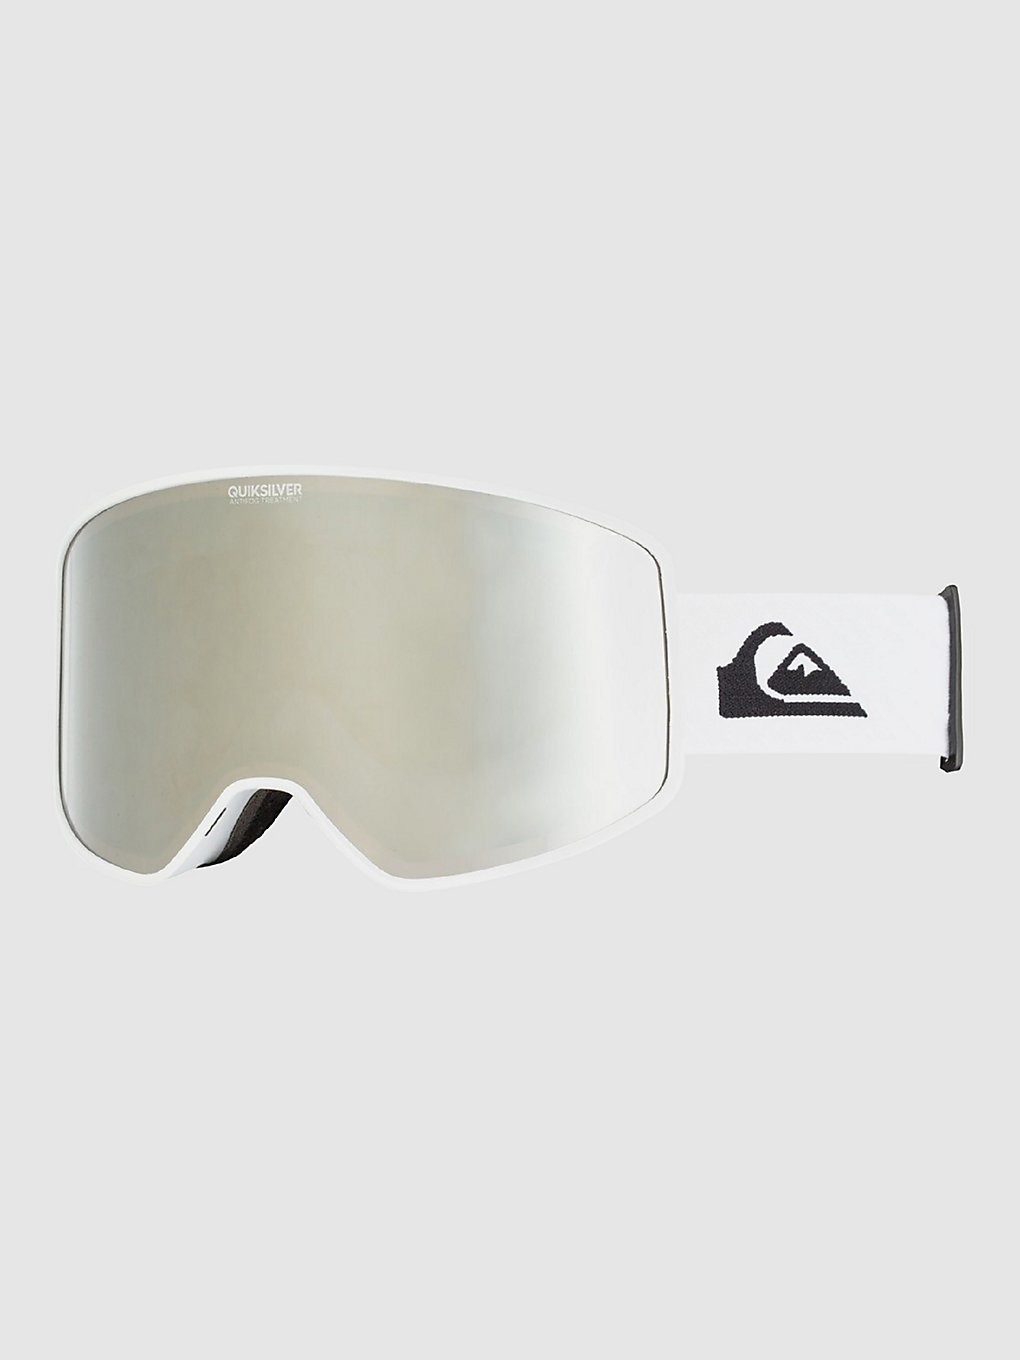 Quiksilver Storm Snow White Goggle amber rose ml silver kaufen